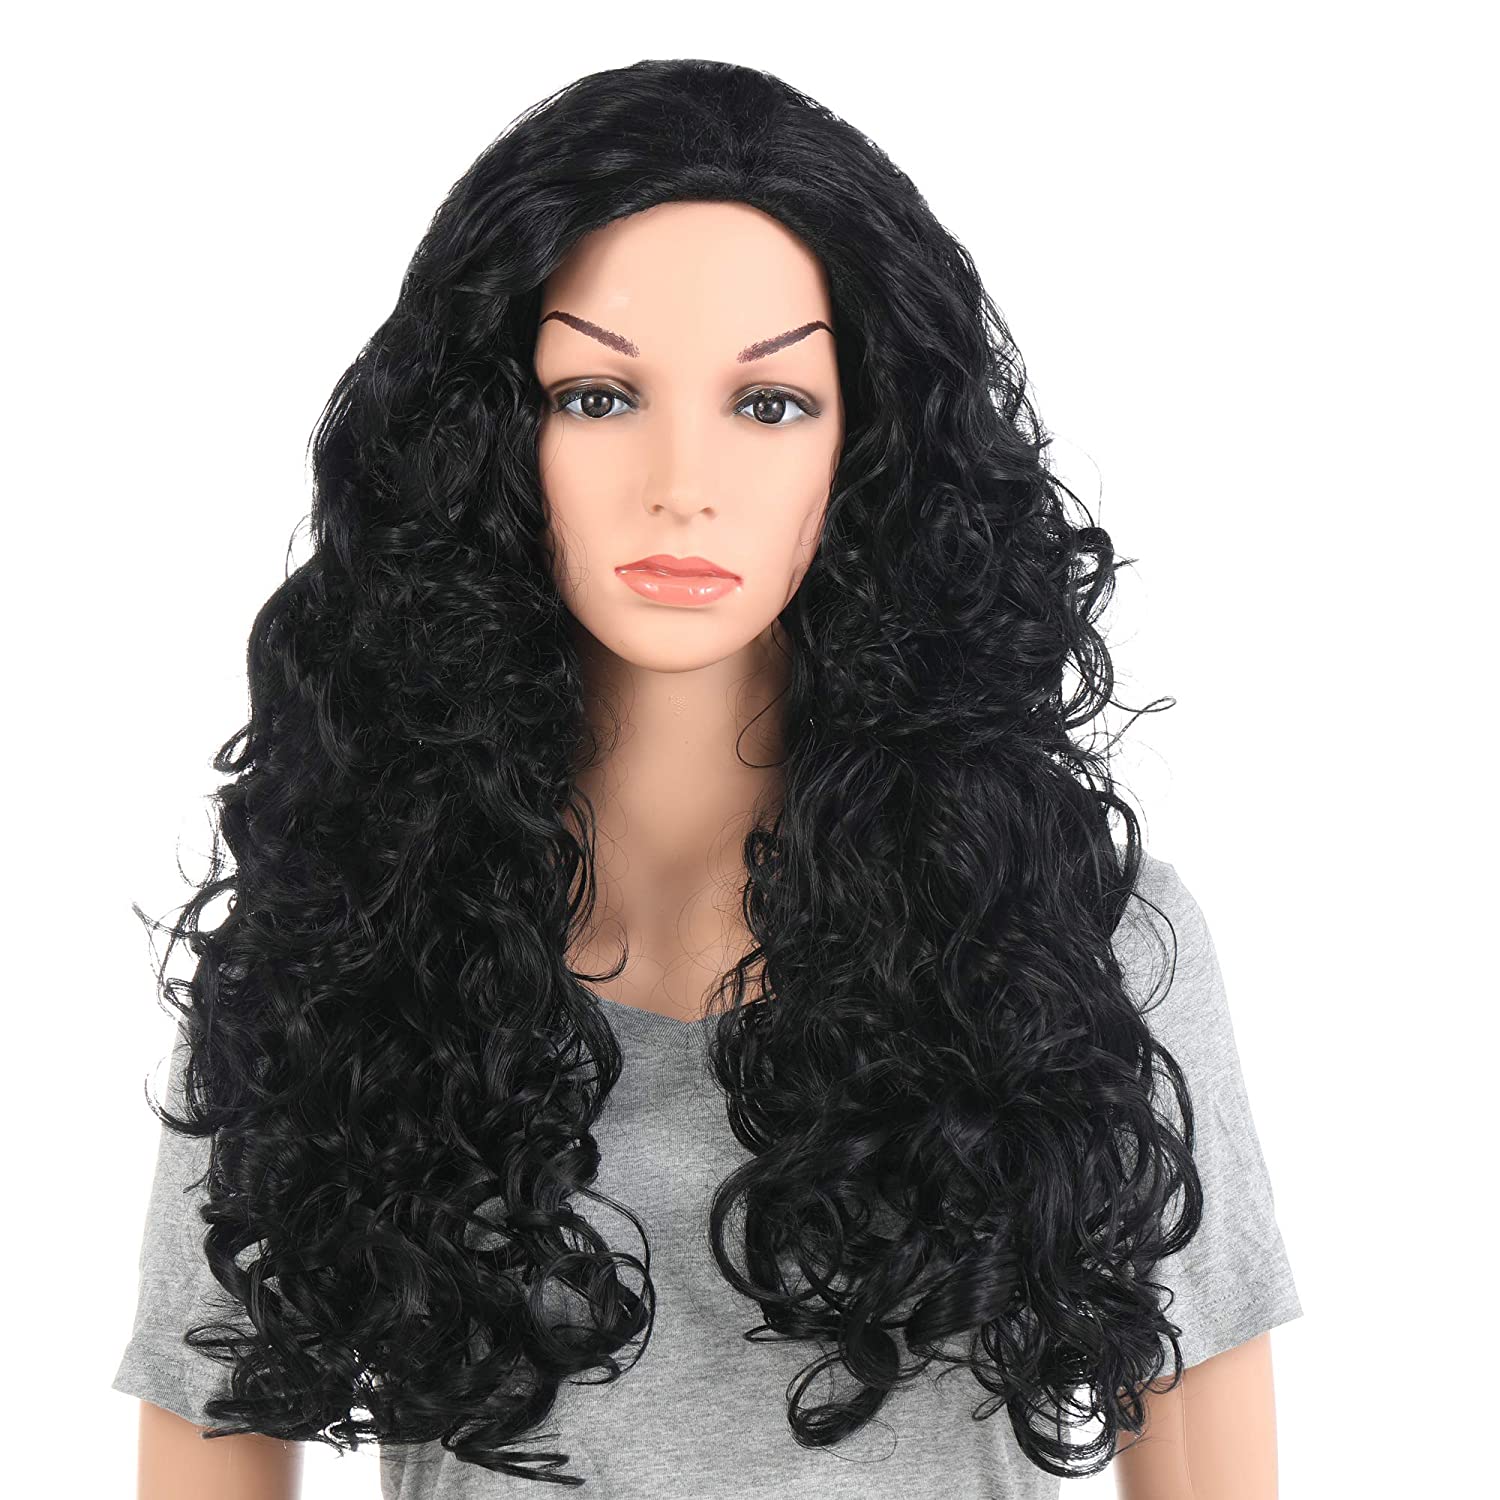 Price:$19.99    OneDor Long Hair Curly Wavy Full Head Halloween Wigs Cosplay Costume Party Hairpiece (1#-Black)  Beauty